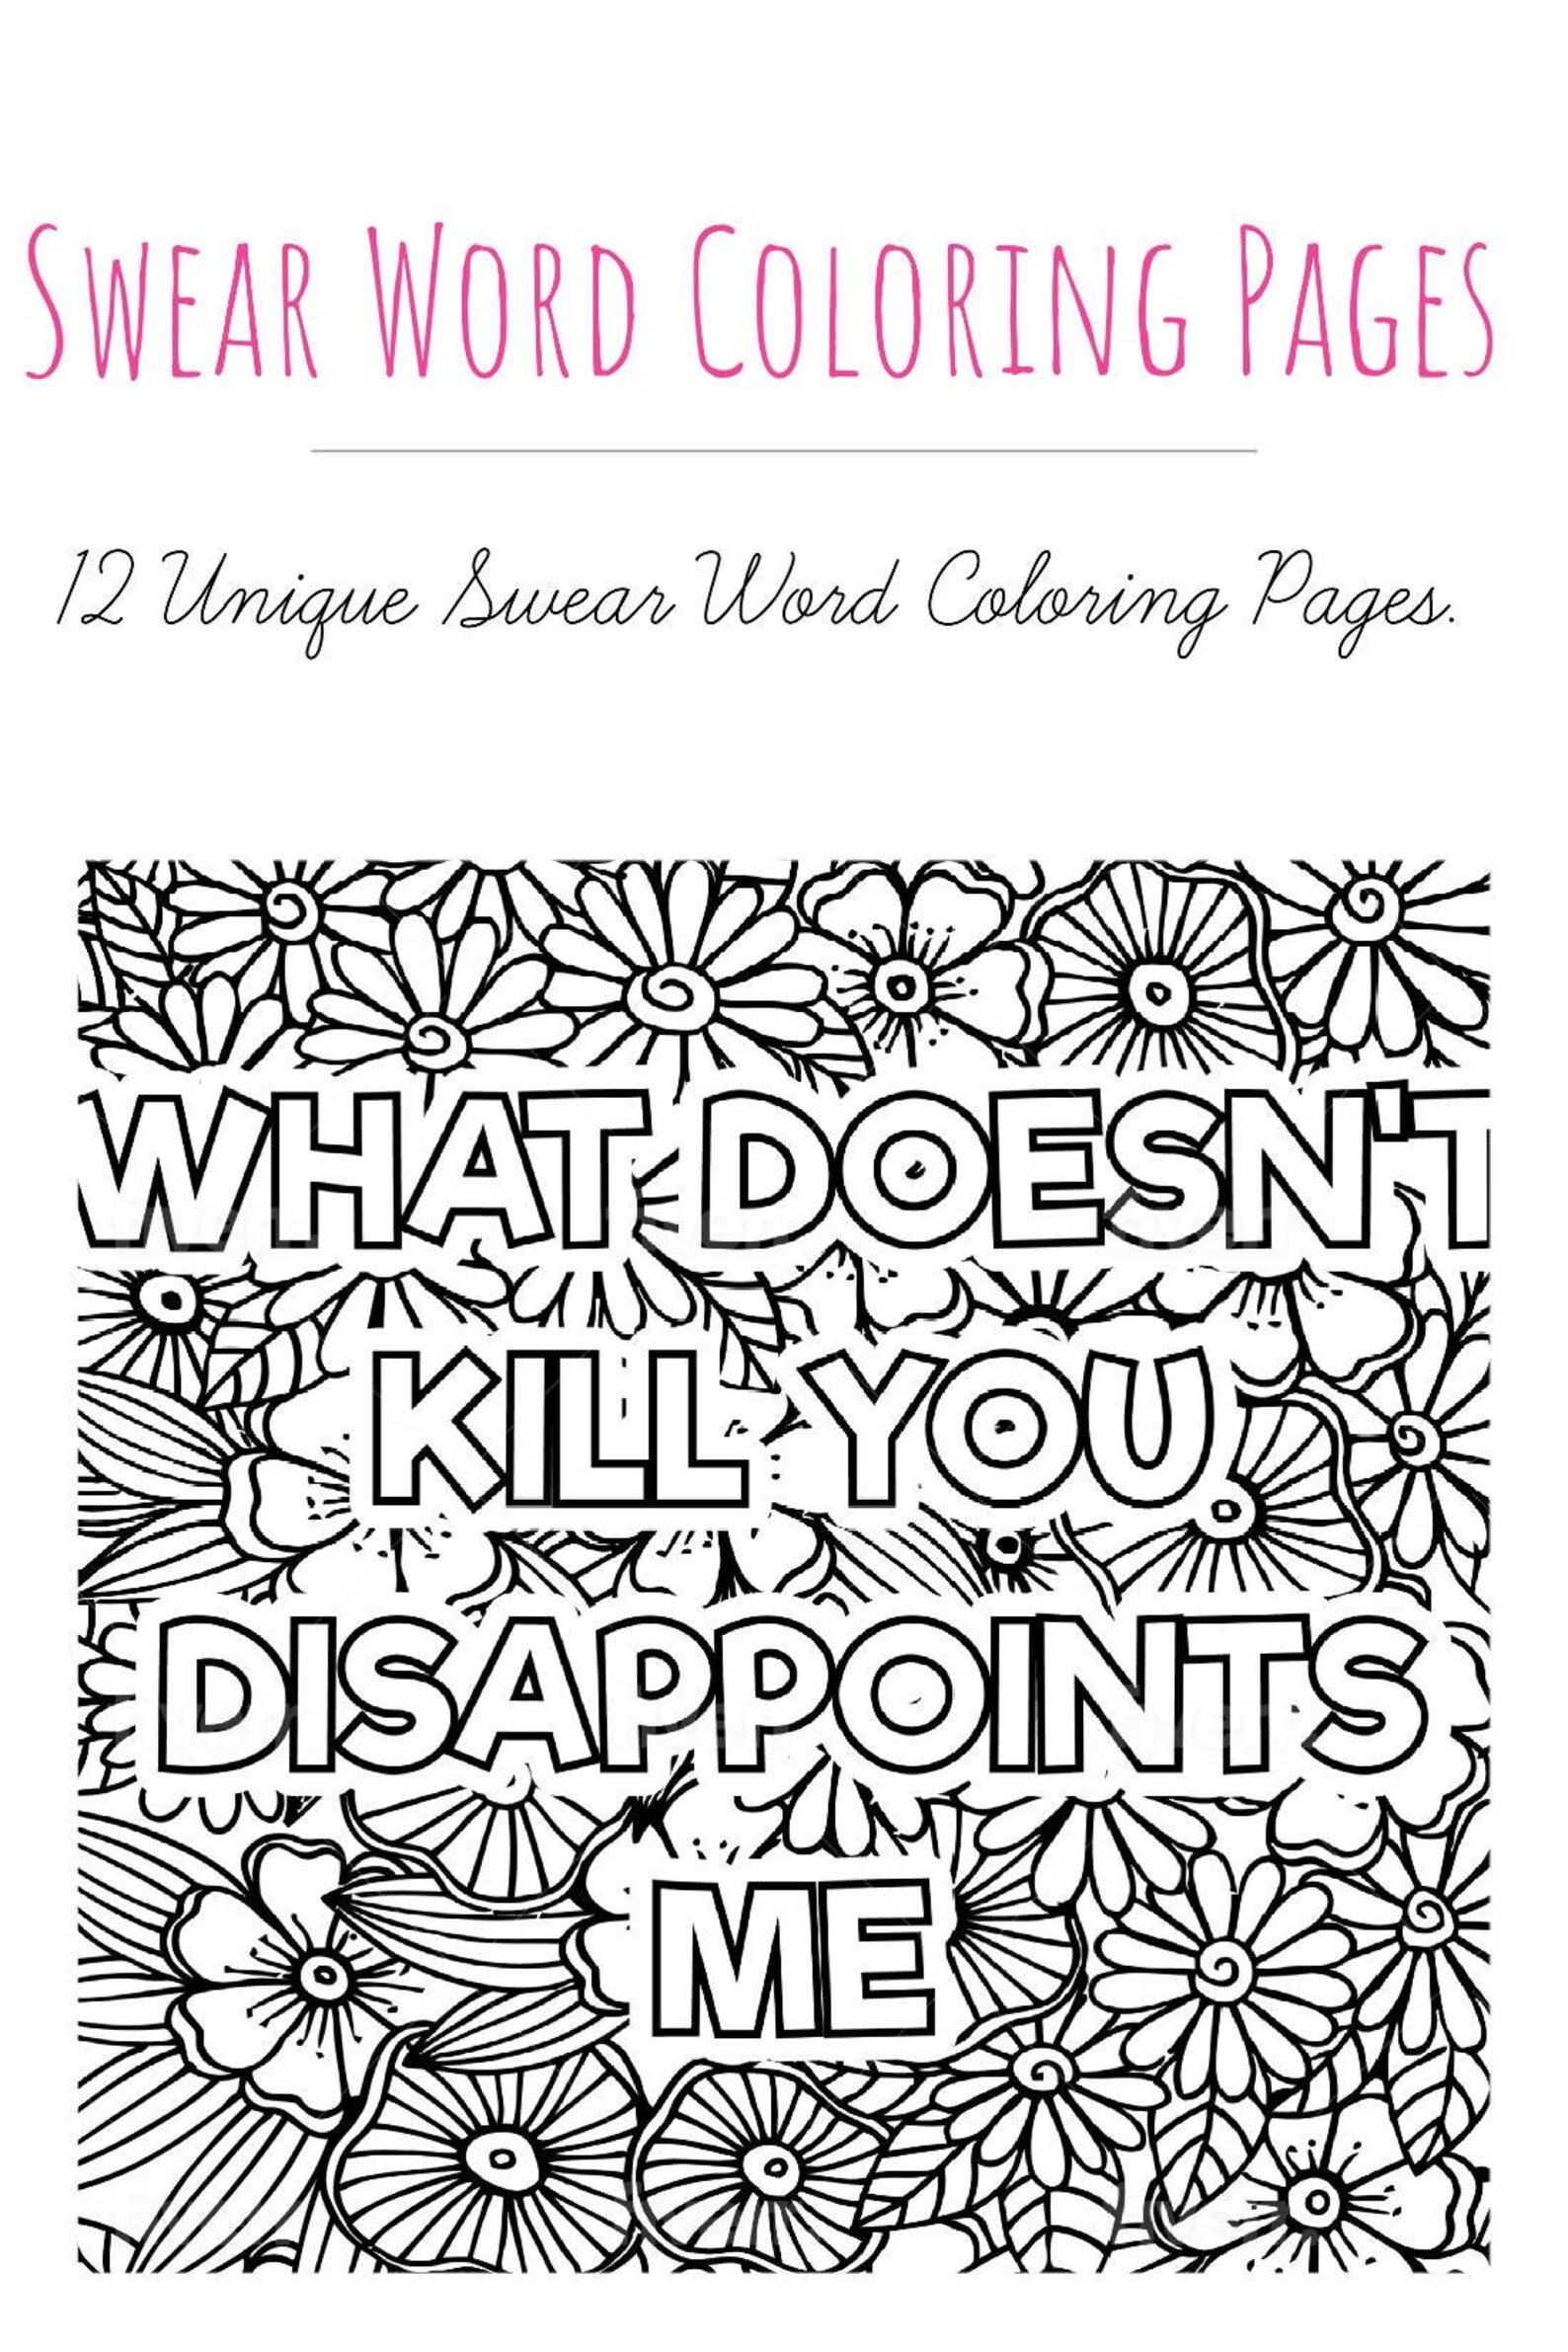 Swear Word Coloring Pages Etsy